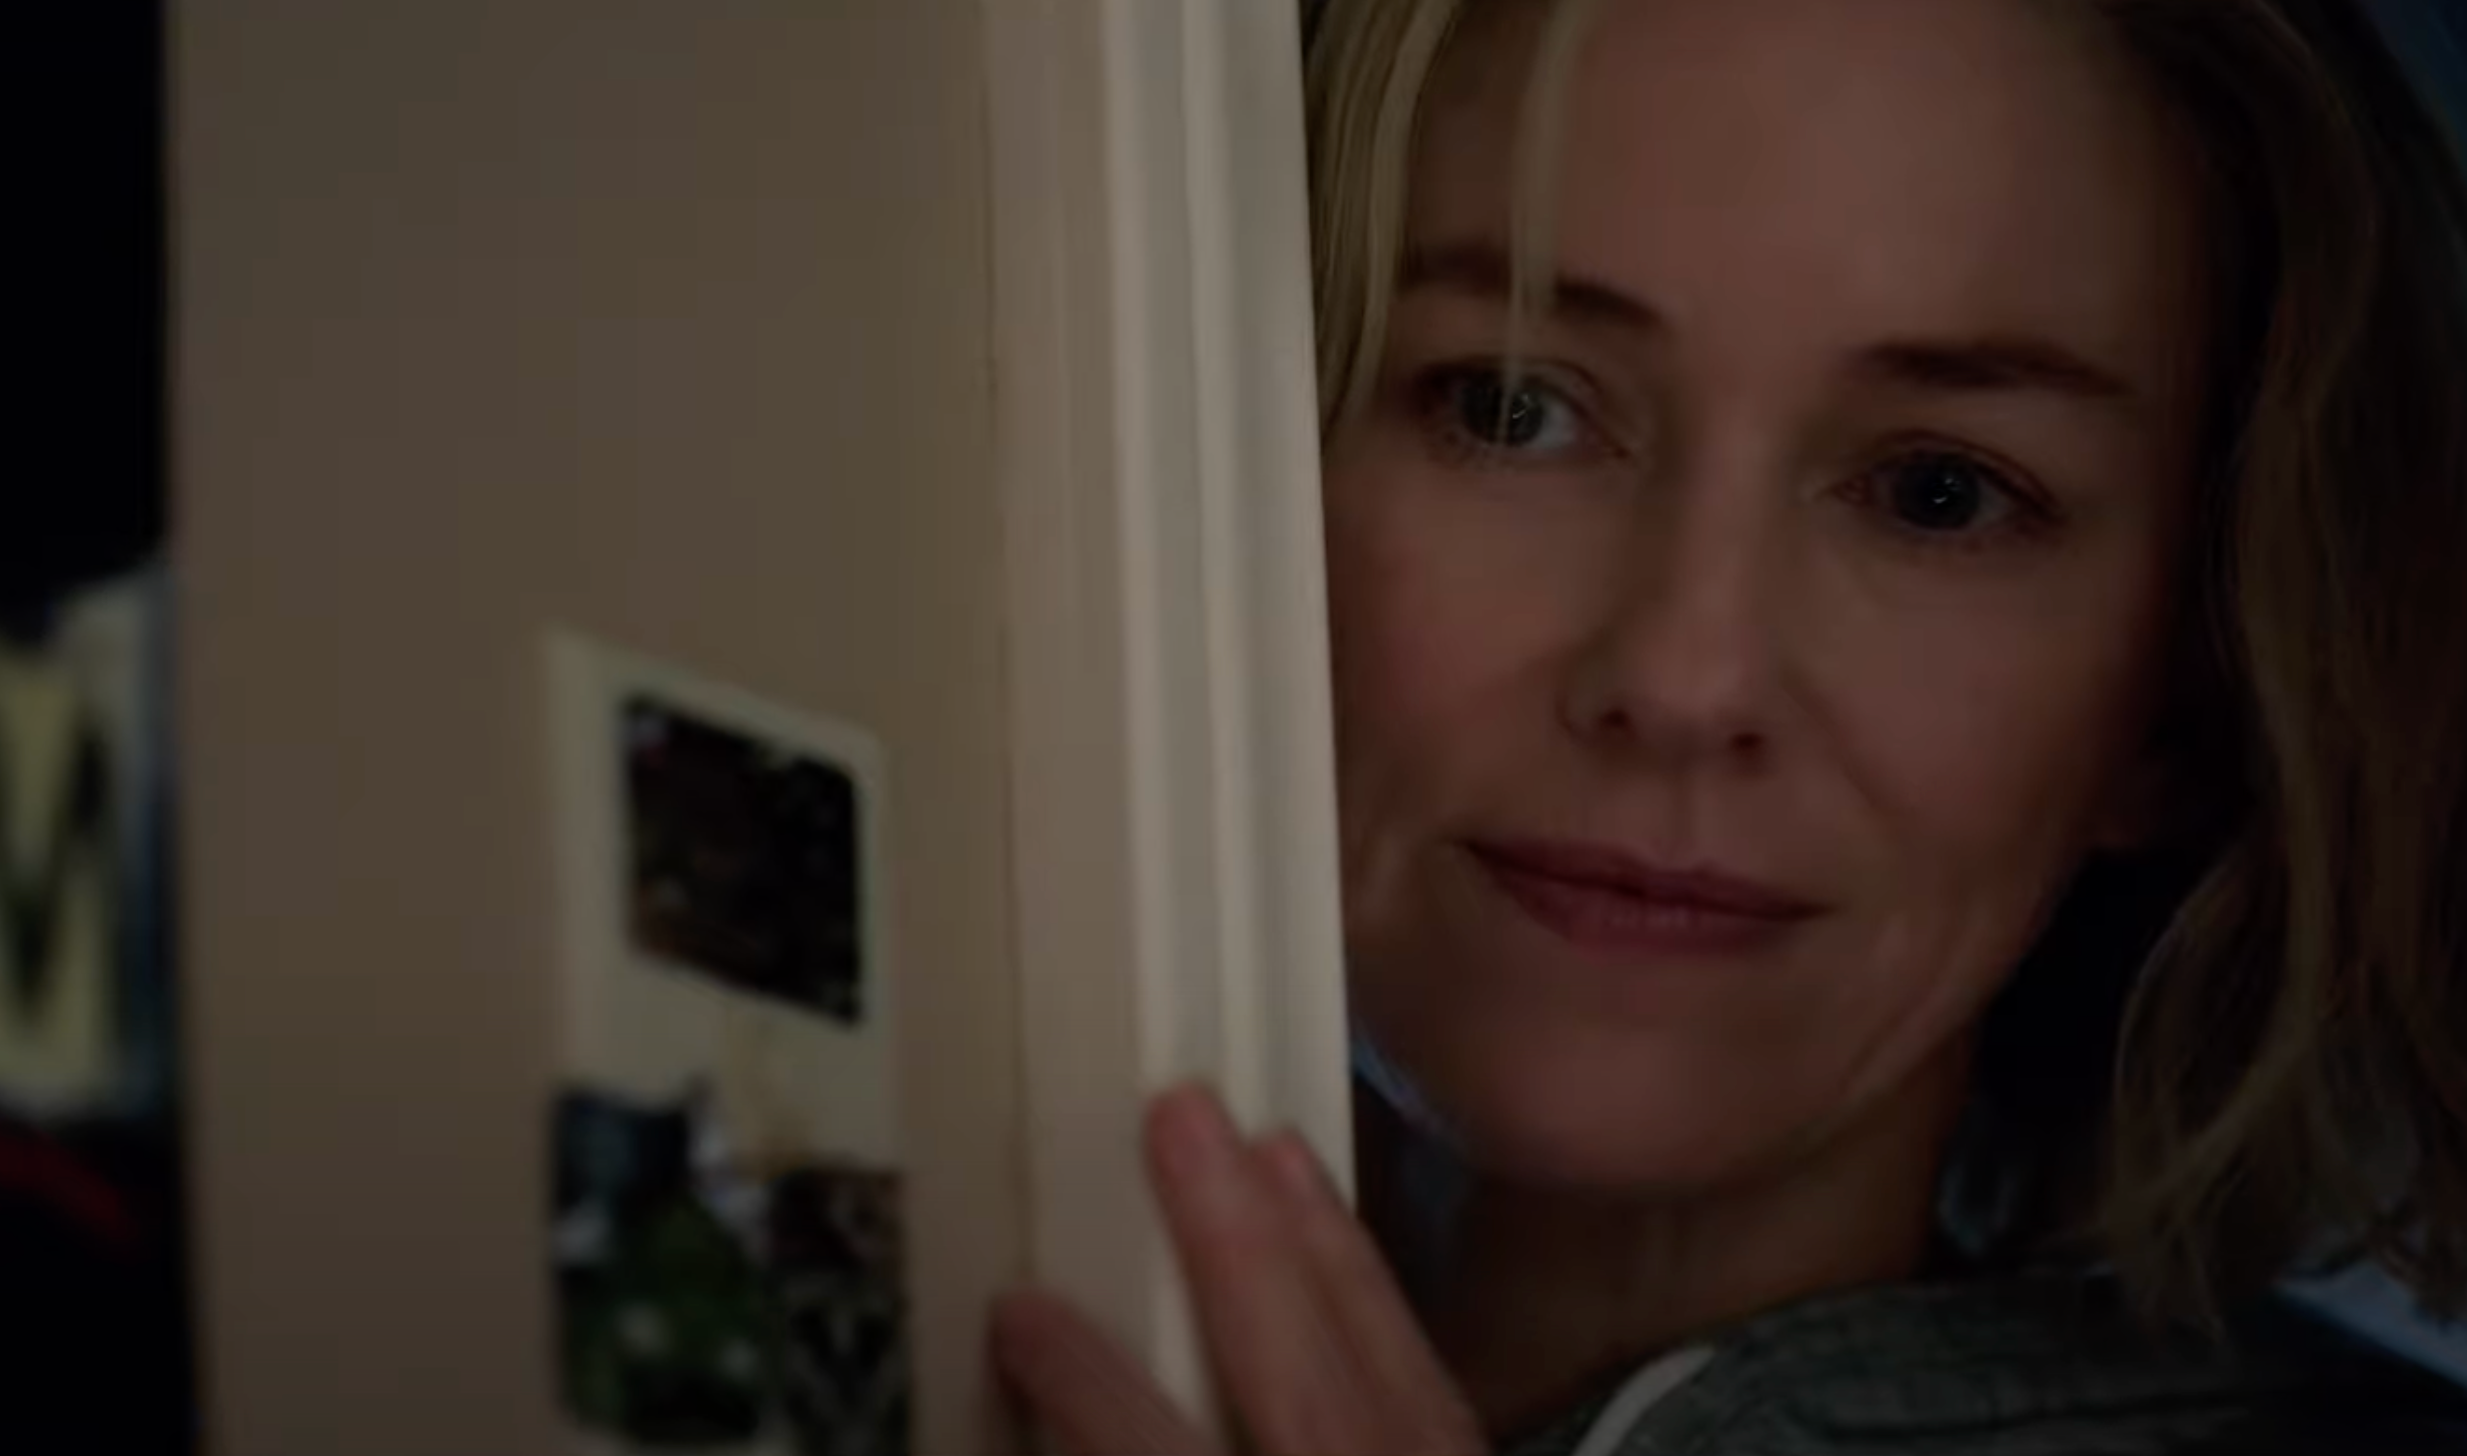 The Desperate Hour Trailer Sees Naomi Watts Racing Against Time